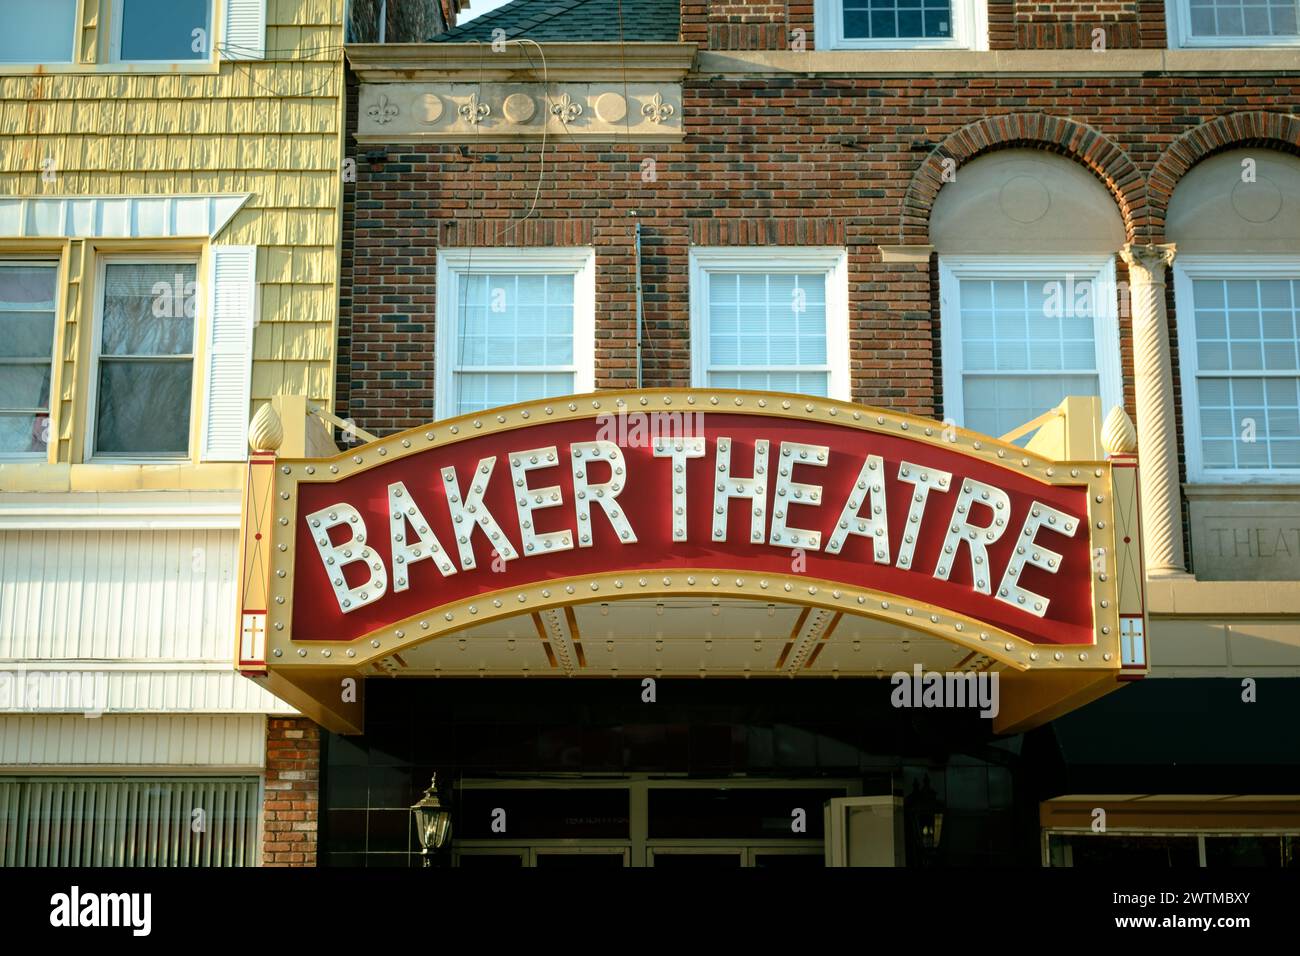 Baker Theater vintage sign, Dover, New Jersey Stock Photo